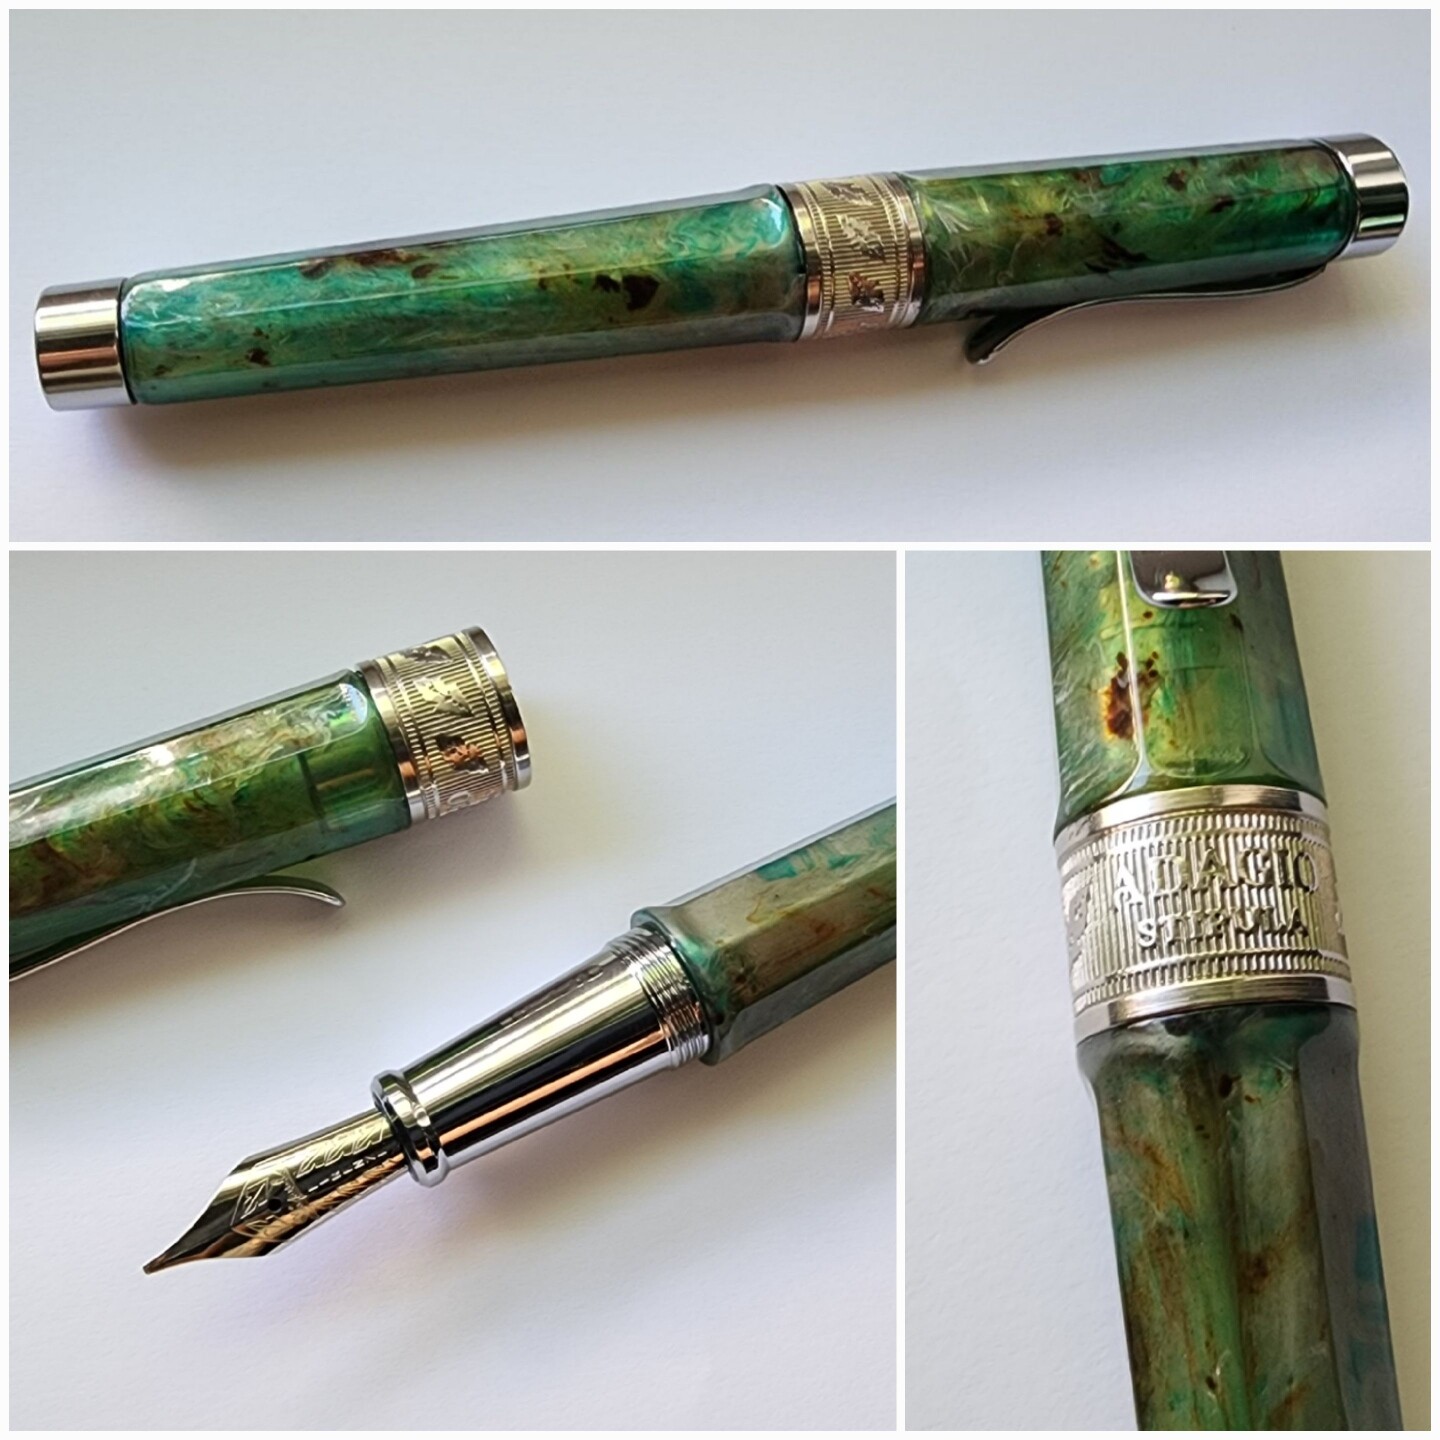 Multiple views of a Stipula Adagio Seaglass fountain pen with a stub nib. The pen has a translucent swirly material with green, blue, brown, and silver colors, a faceted barrel and cap, silver colored metal accents including a wide metal cap band with 'Adagio Stipula', vertical line texture and a ring of leaves.